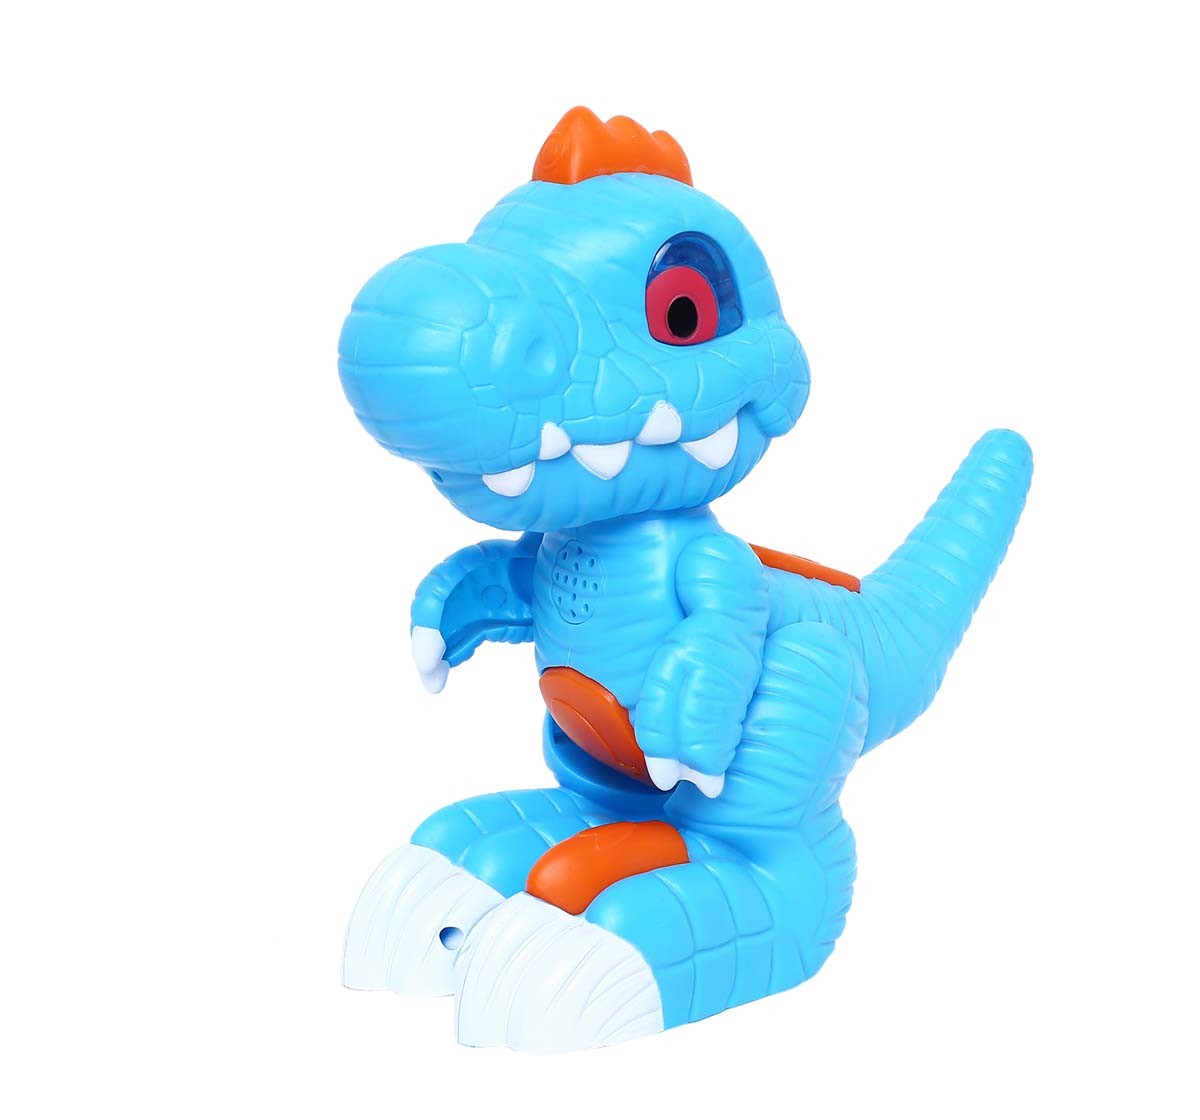 Dragon I Interactive Trex Touch and Talk Activity Toys for Kids age 3Y+ 